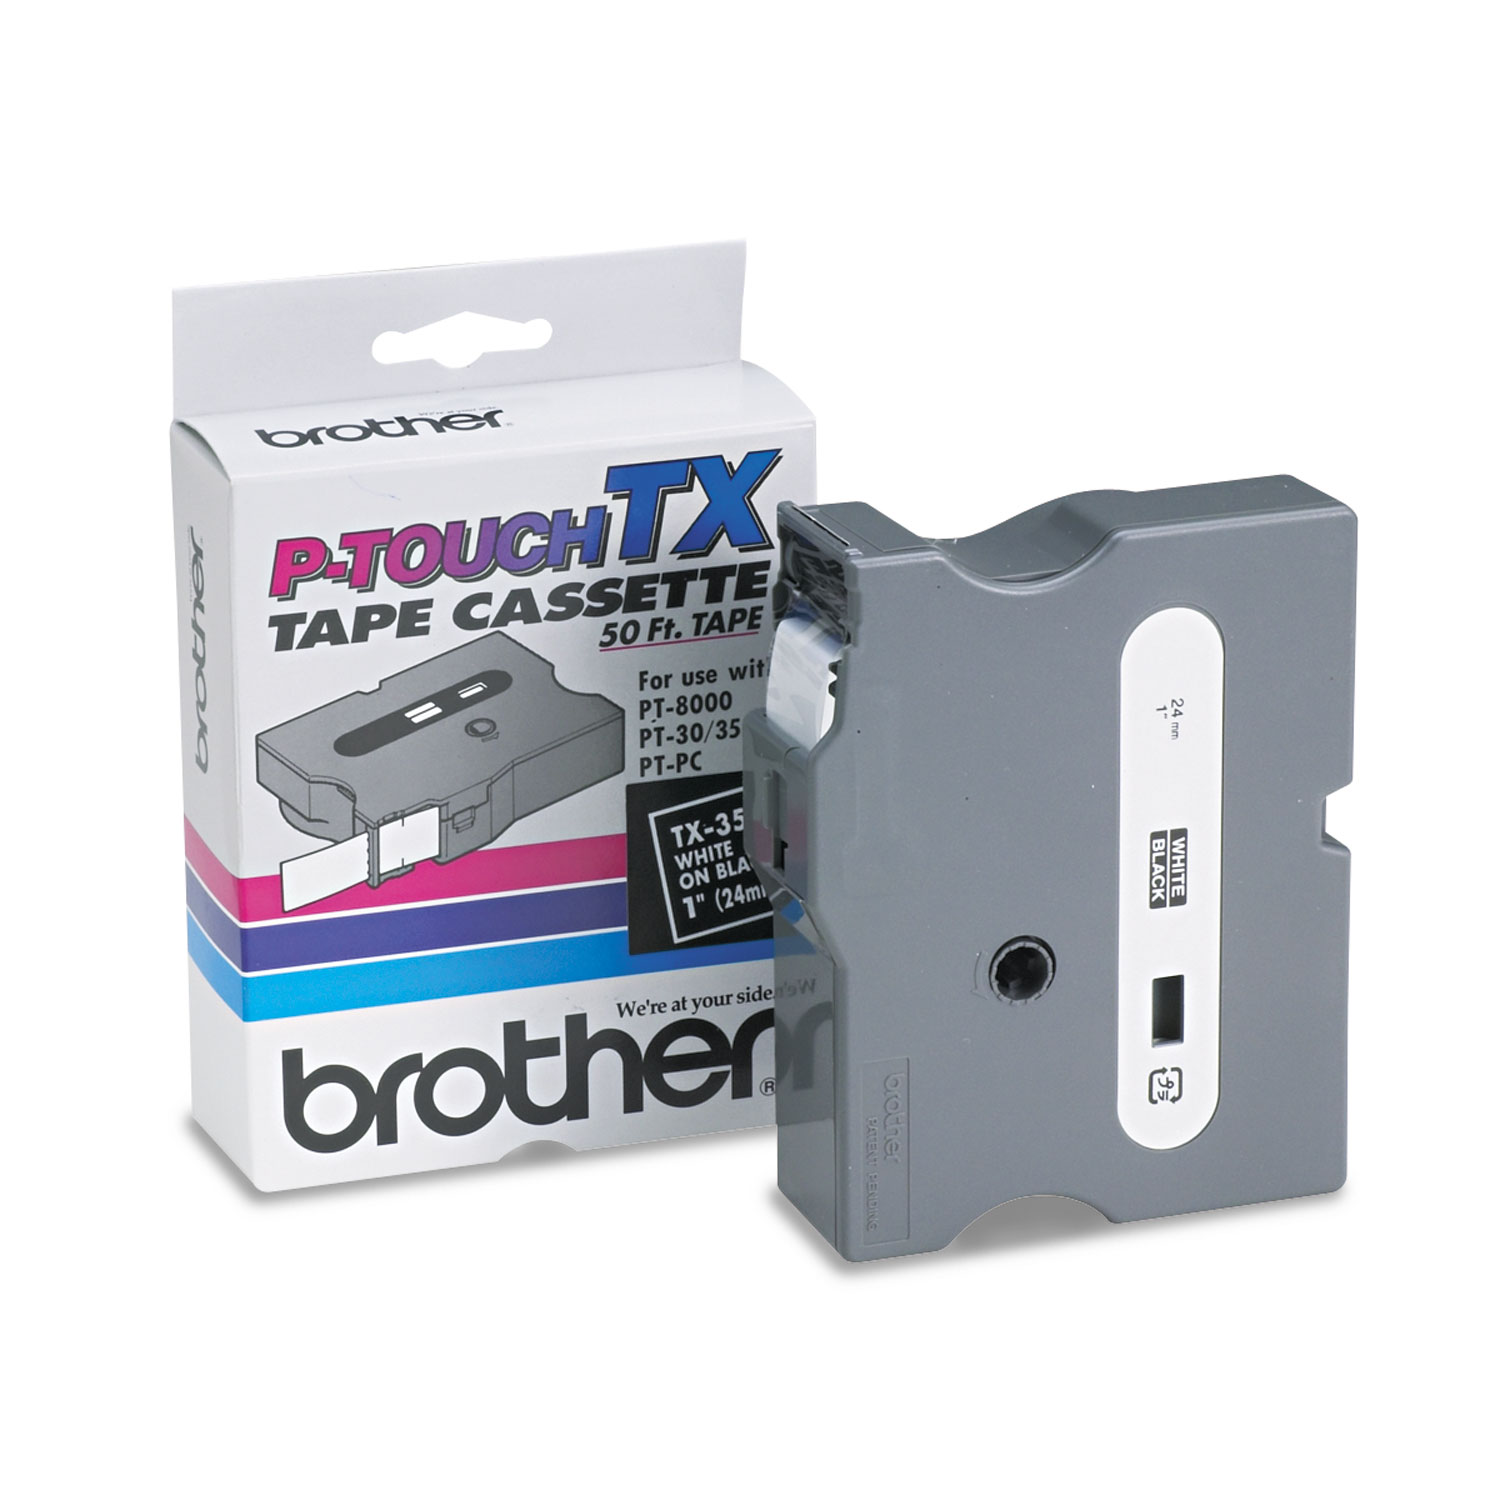  Brother P-Touch TX3551 TX Tape Cartridge for PT-8000, PT-PC, PT-30/35, 0.94 x 50 ft, White on Black (BRTTX3551) 